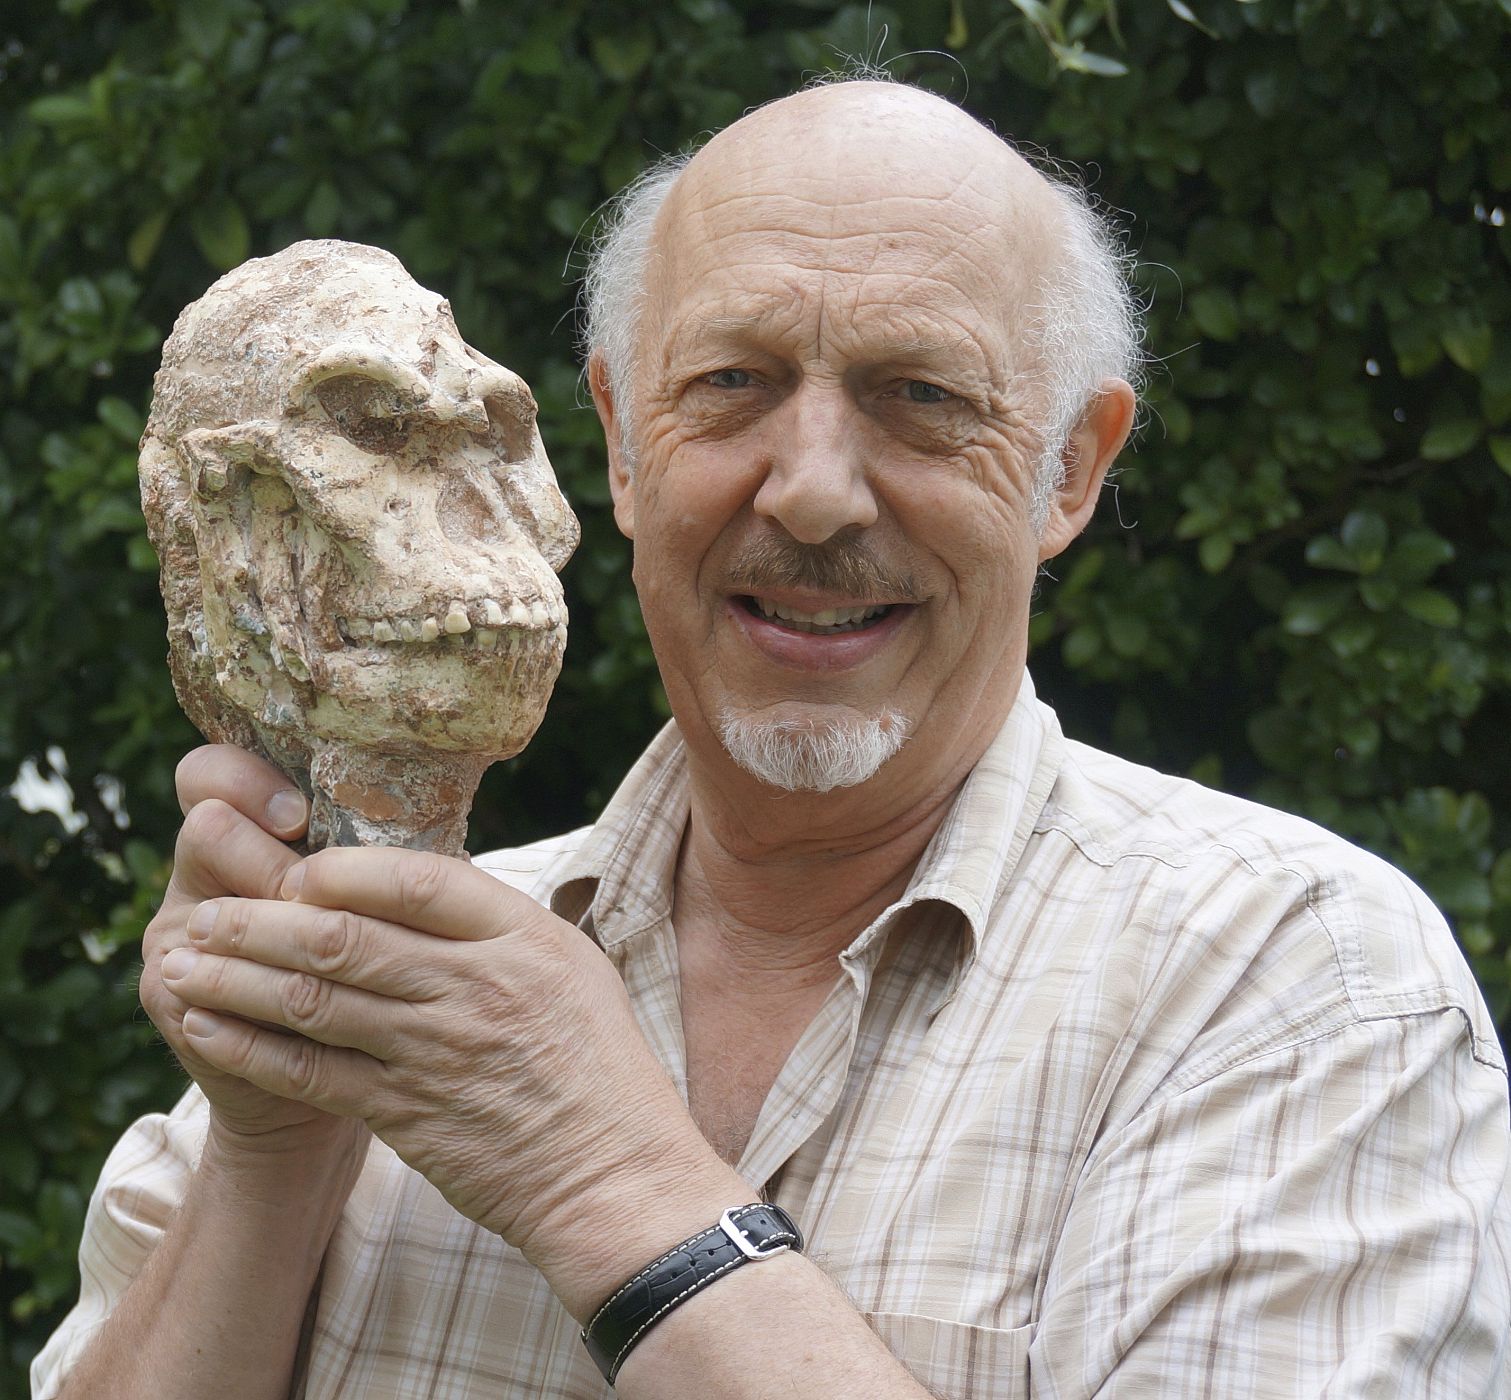 Undated handout photo of Clarke, professor in the Evolutionary Studies Institute at Wits University in South Africa seen with the Little Foot skull